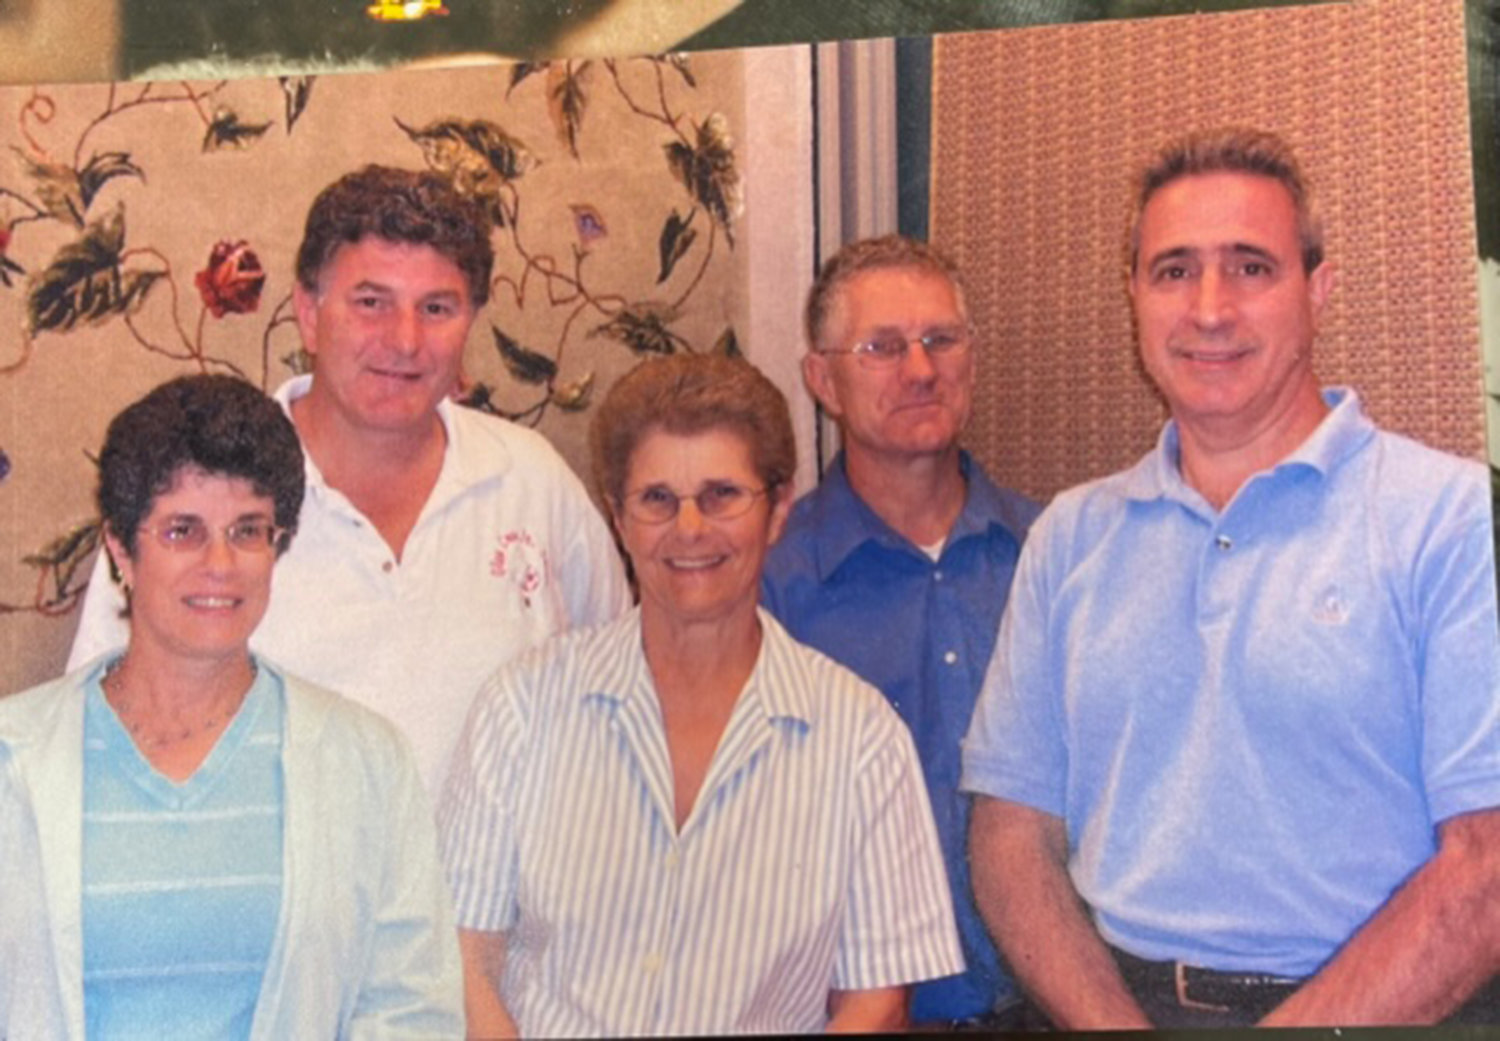 THe children of the late founder of Glen Floors, Fred Capobianco, from left, Jane Rodier, Jerry Capobianco, Carol Nelson and Bill Capobianco, and Bill’s son-in-law, Michael Capobianco, continue Fred’s legacy at Glen Floors.